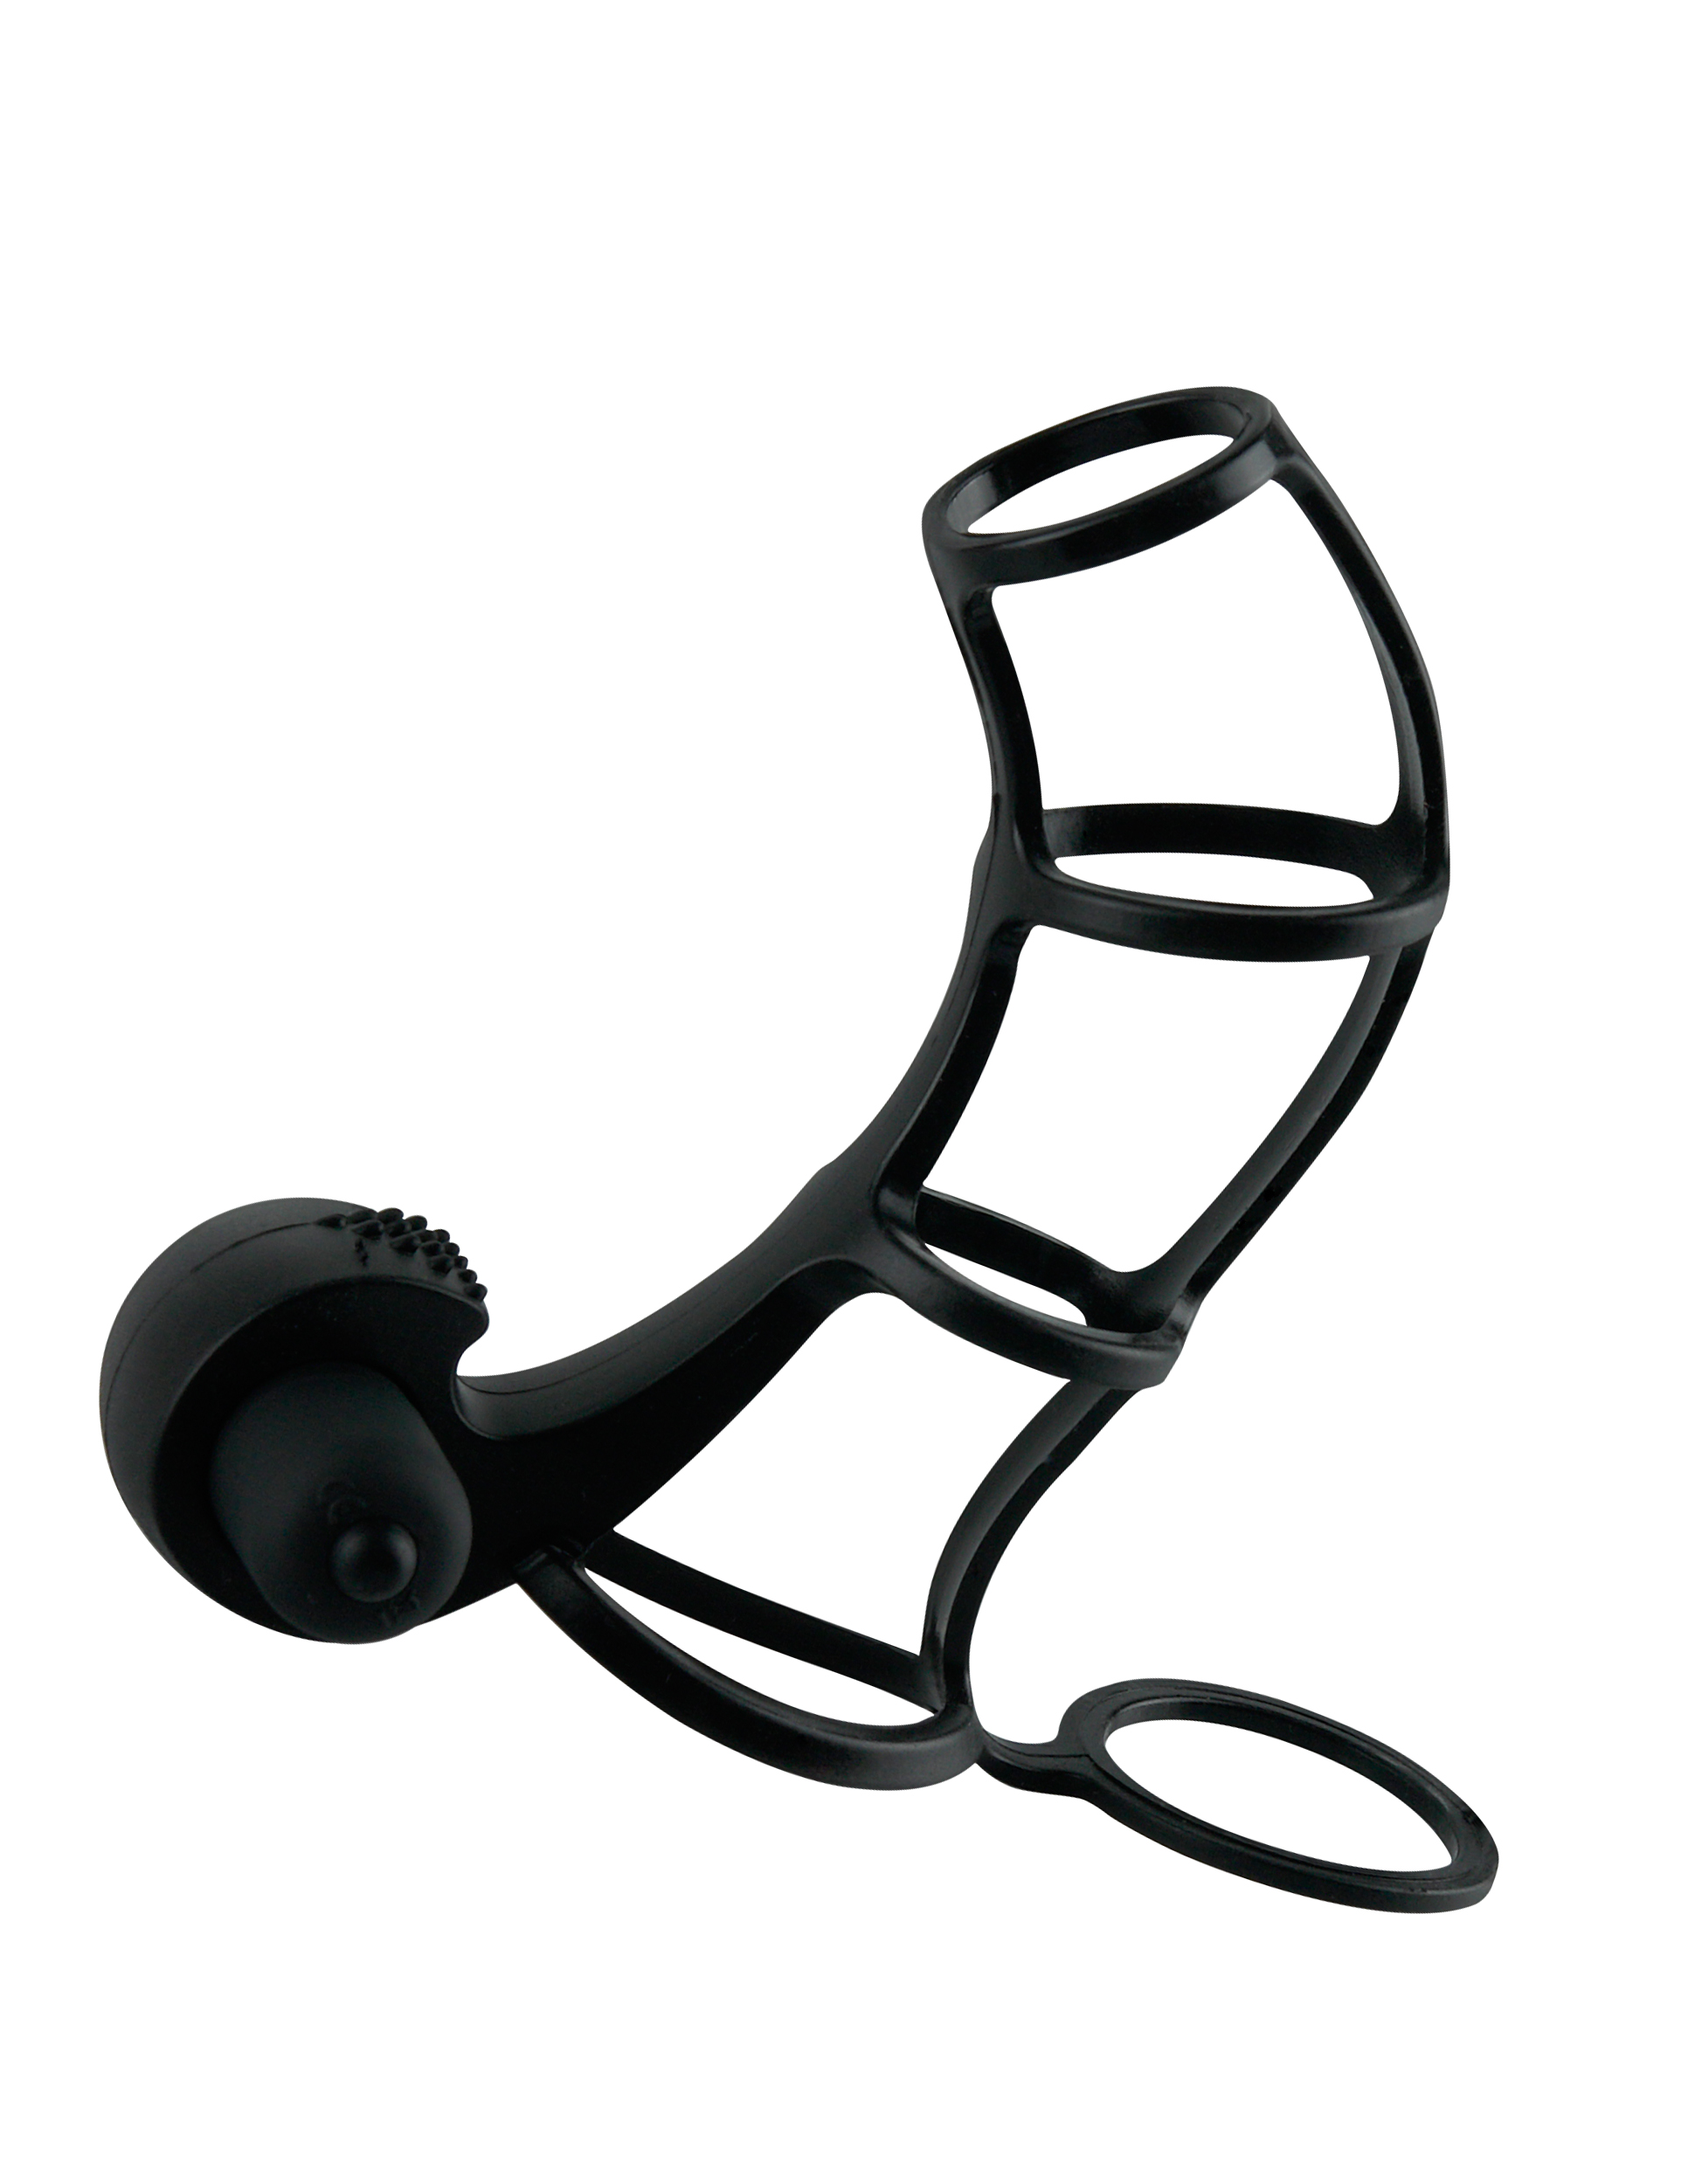 fantasy x tensions deluxe silicone power cage black 